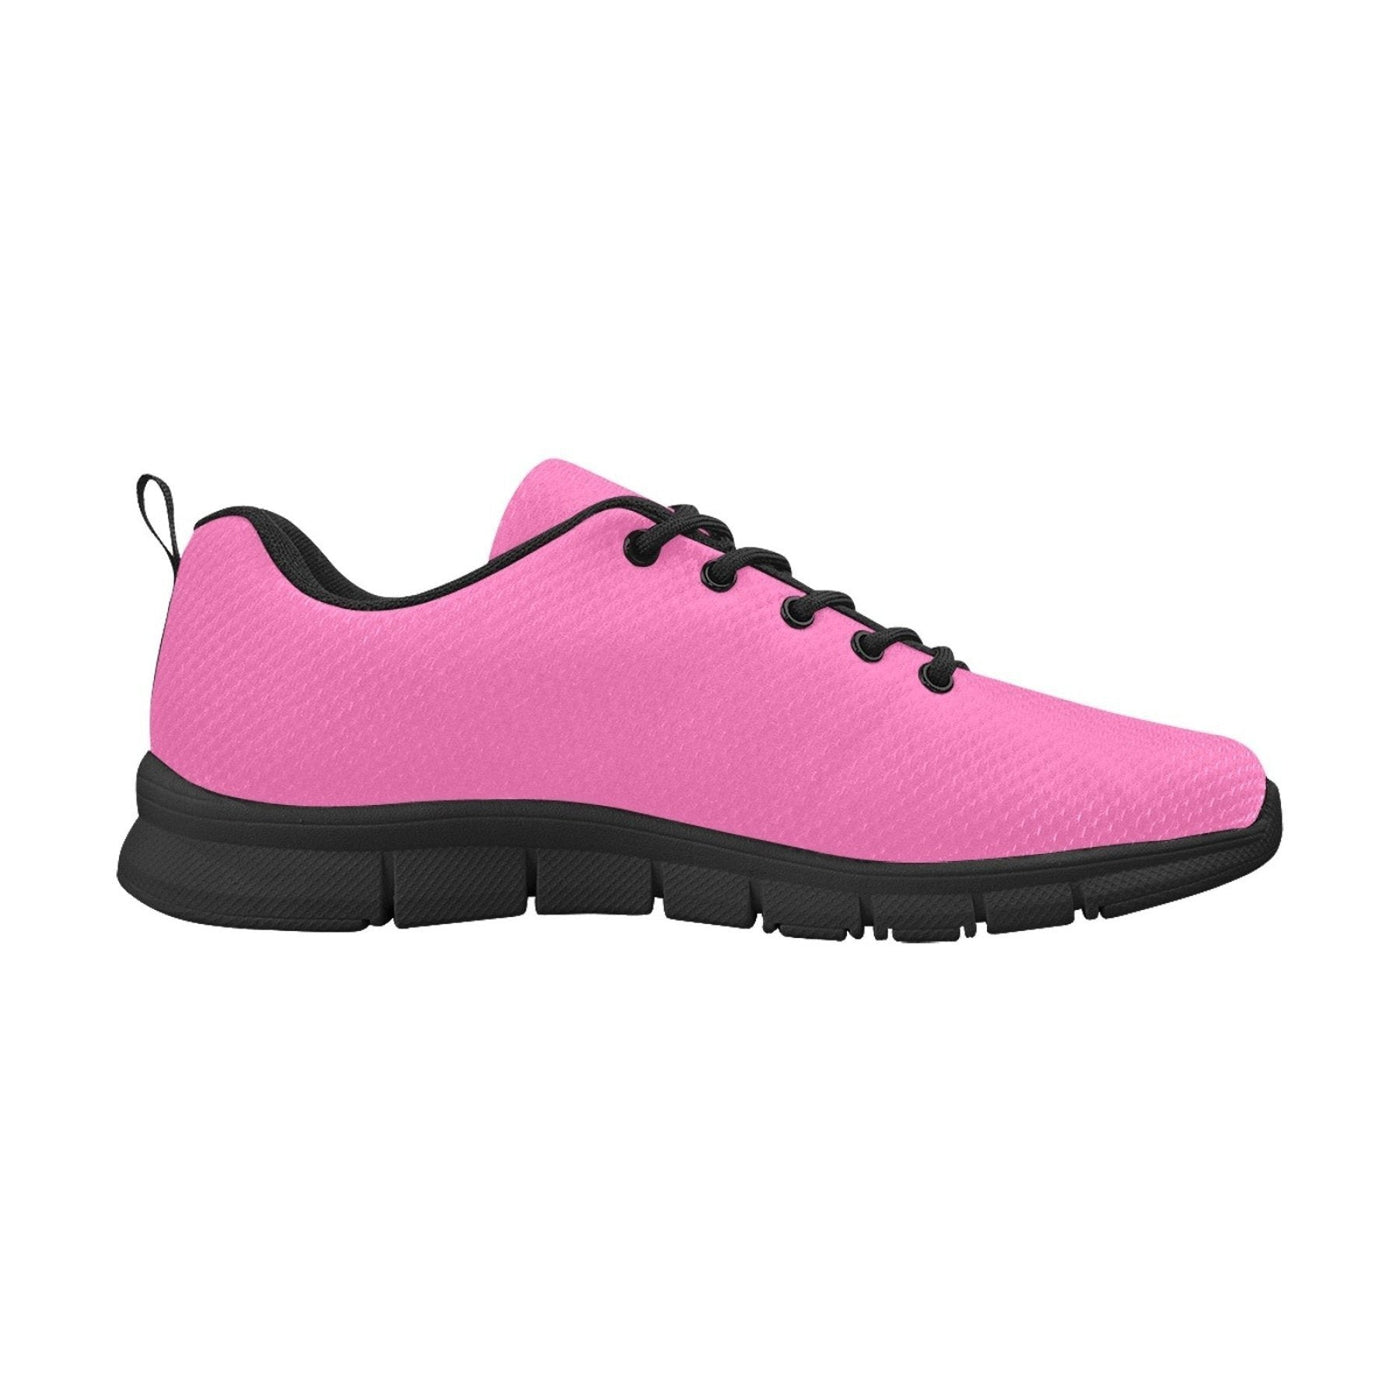 Sneakers For Women Hot Pink And Black - Running Shoes - Womens | Sneakers |